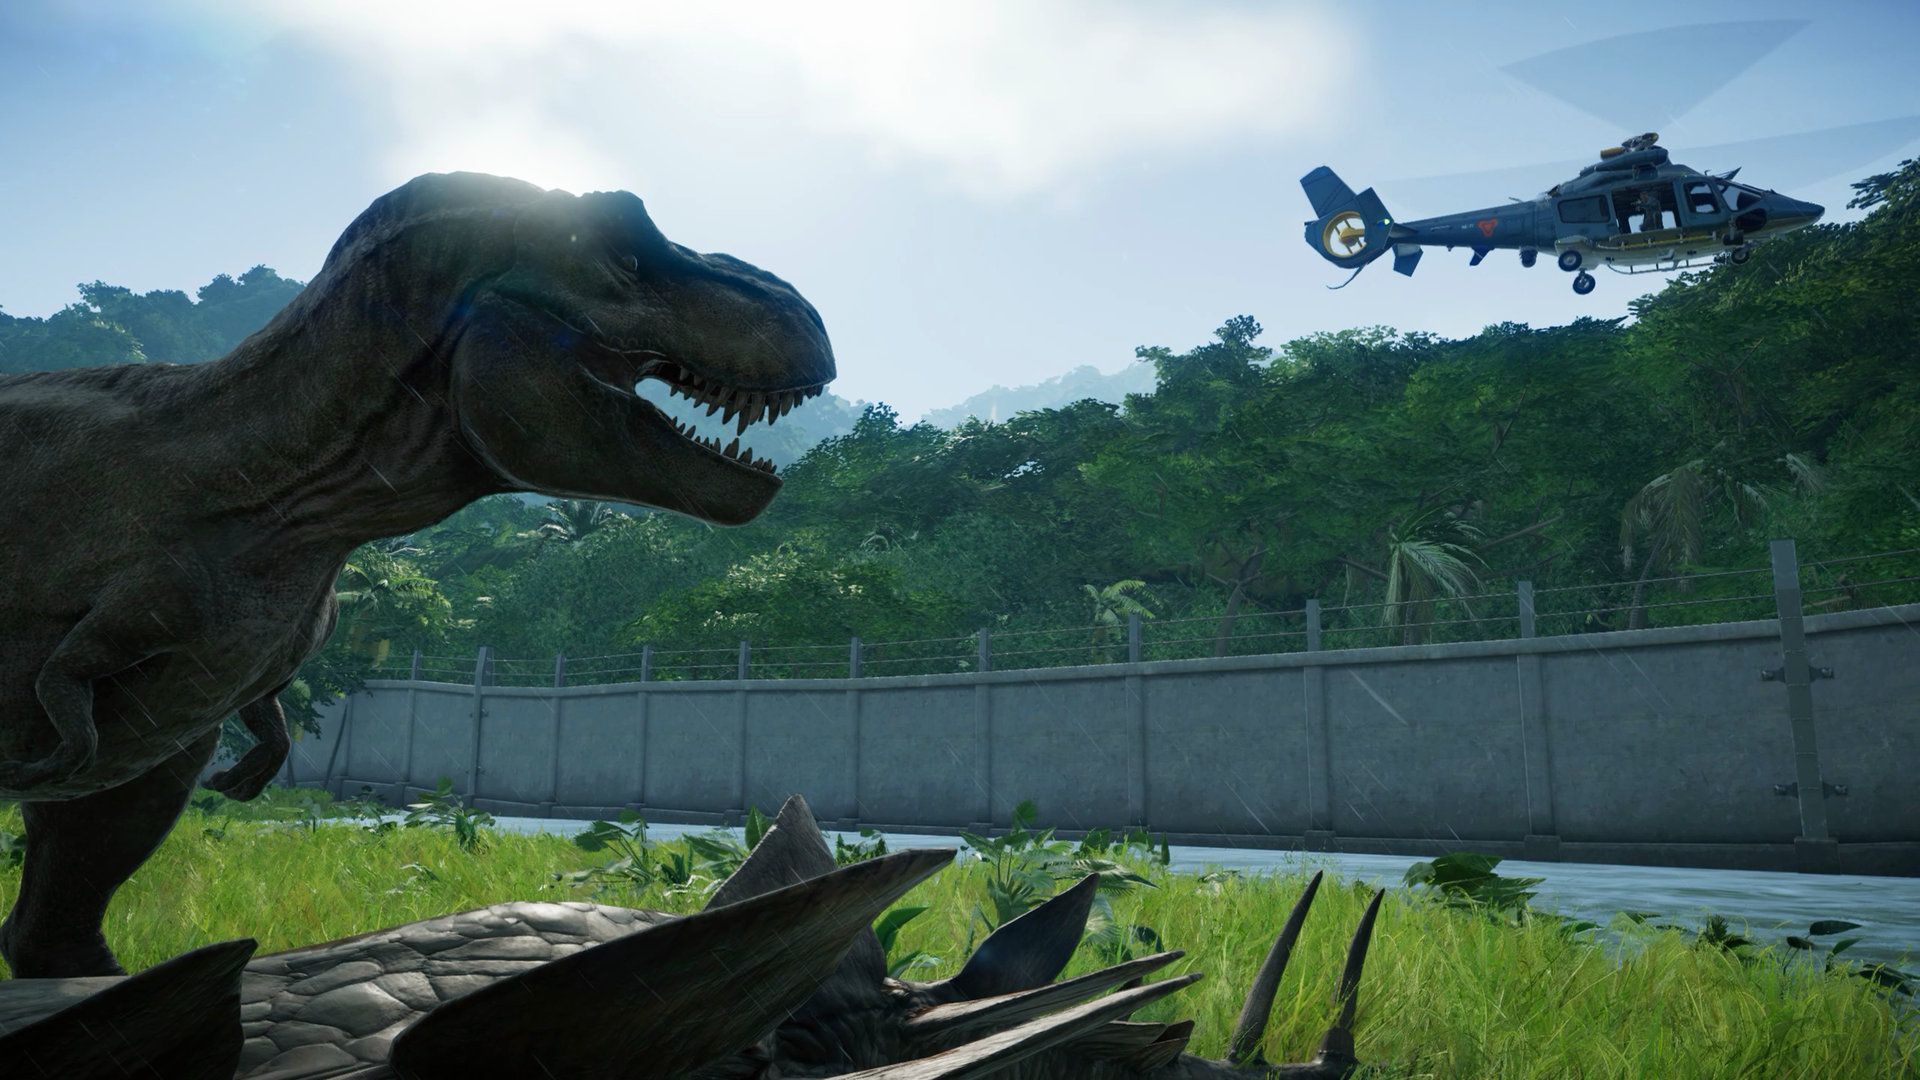 Jurassic World games - a t-rex looks at a helicopter above a fence at the end of a grassy patch, in from of a dense jungle.